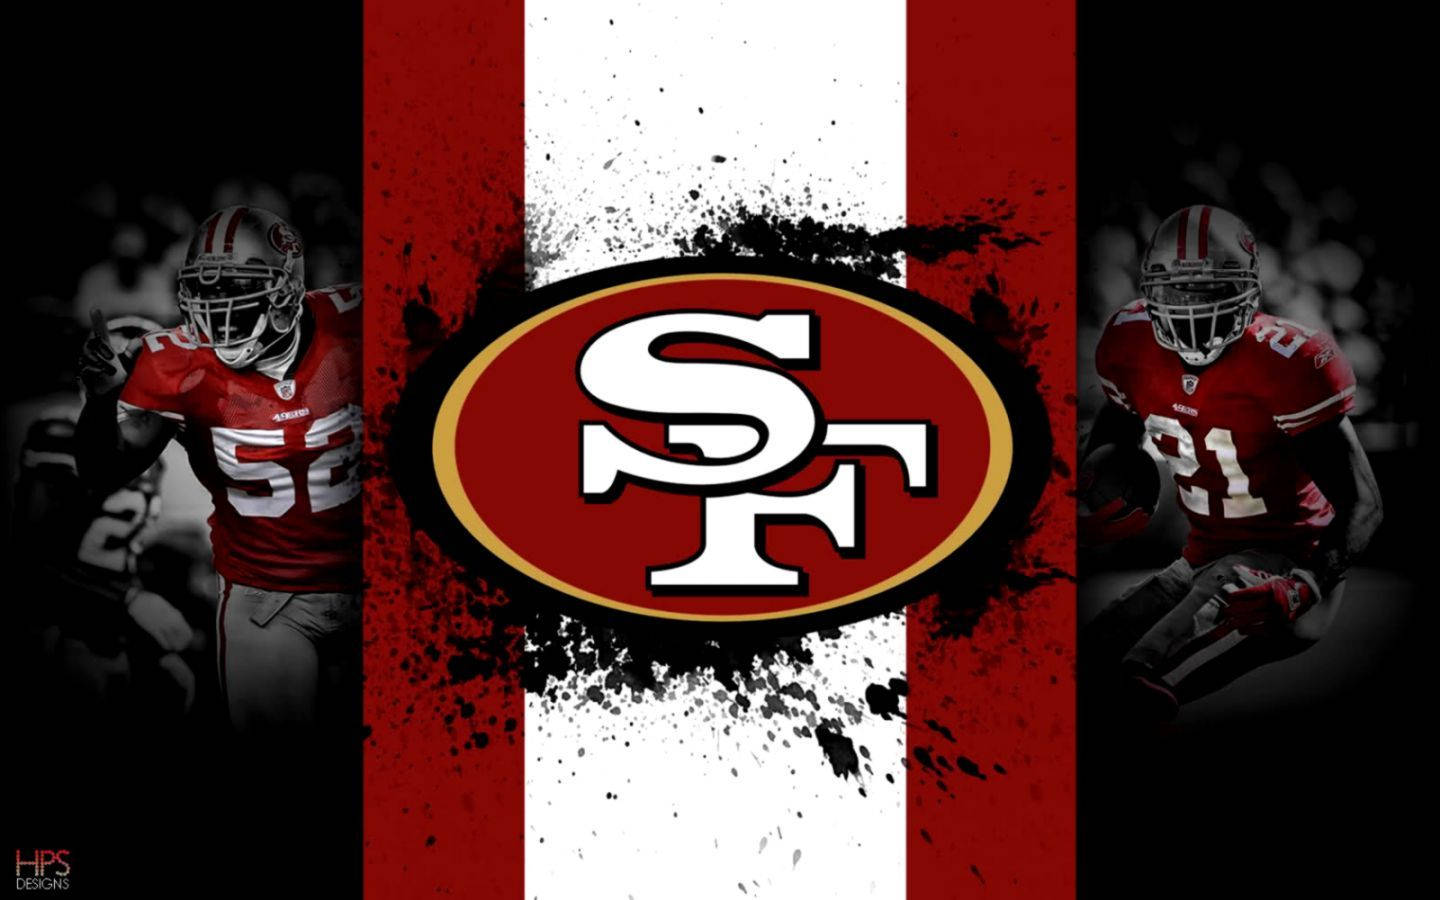 Patrick Willis And Deion Sanders Taking The San Francisco 49ers To Victory.